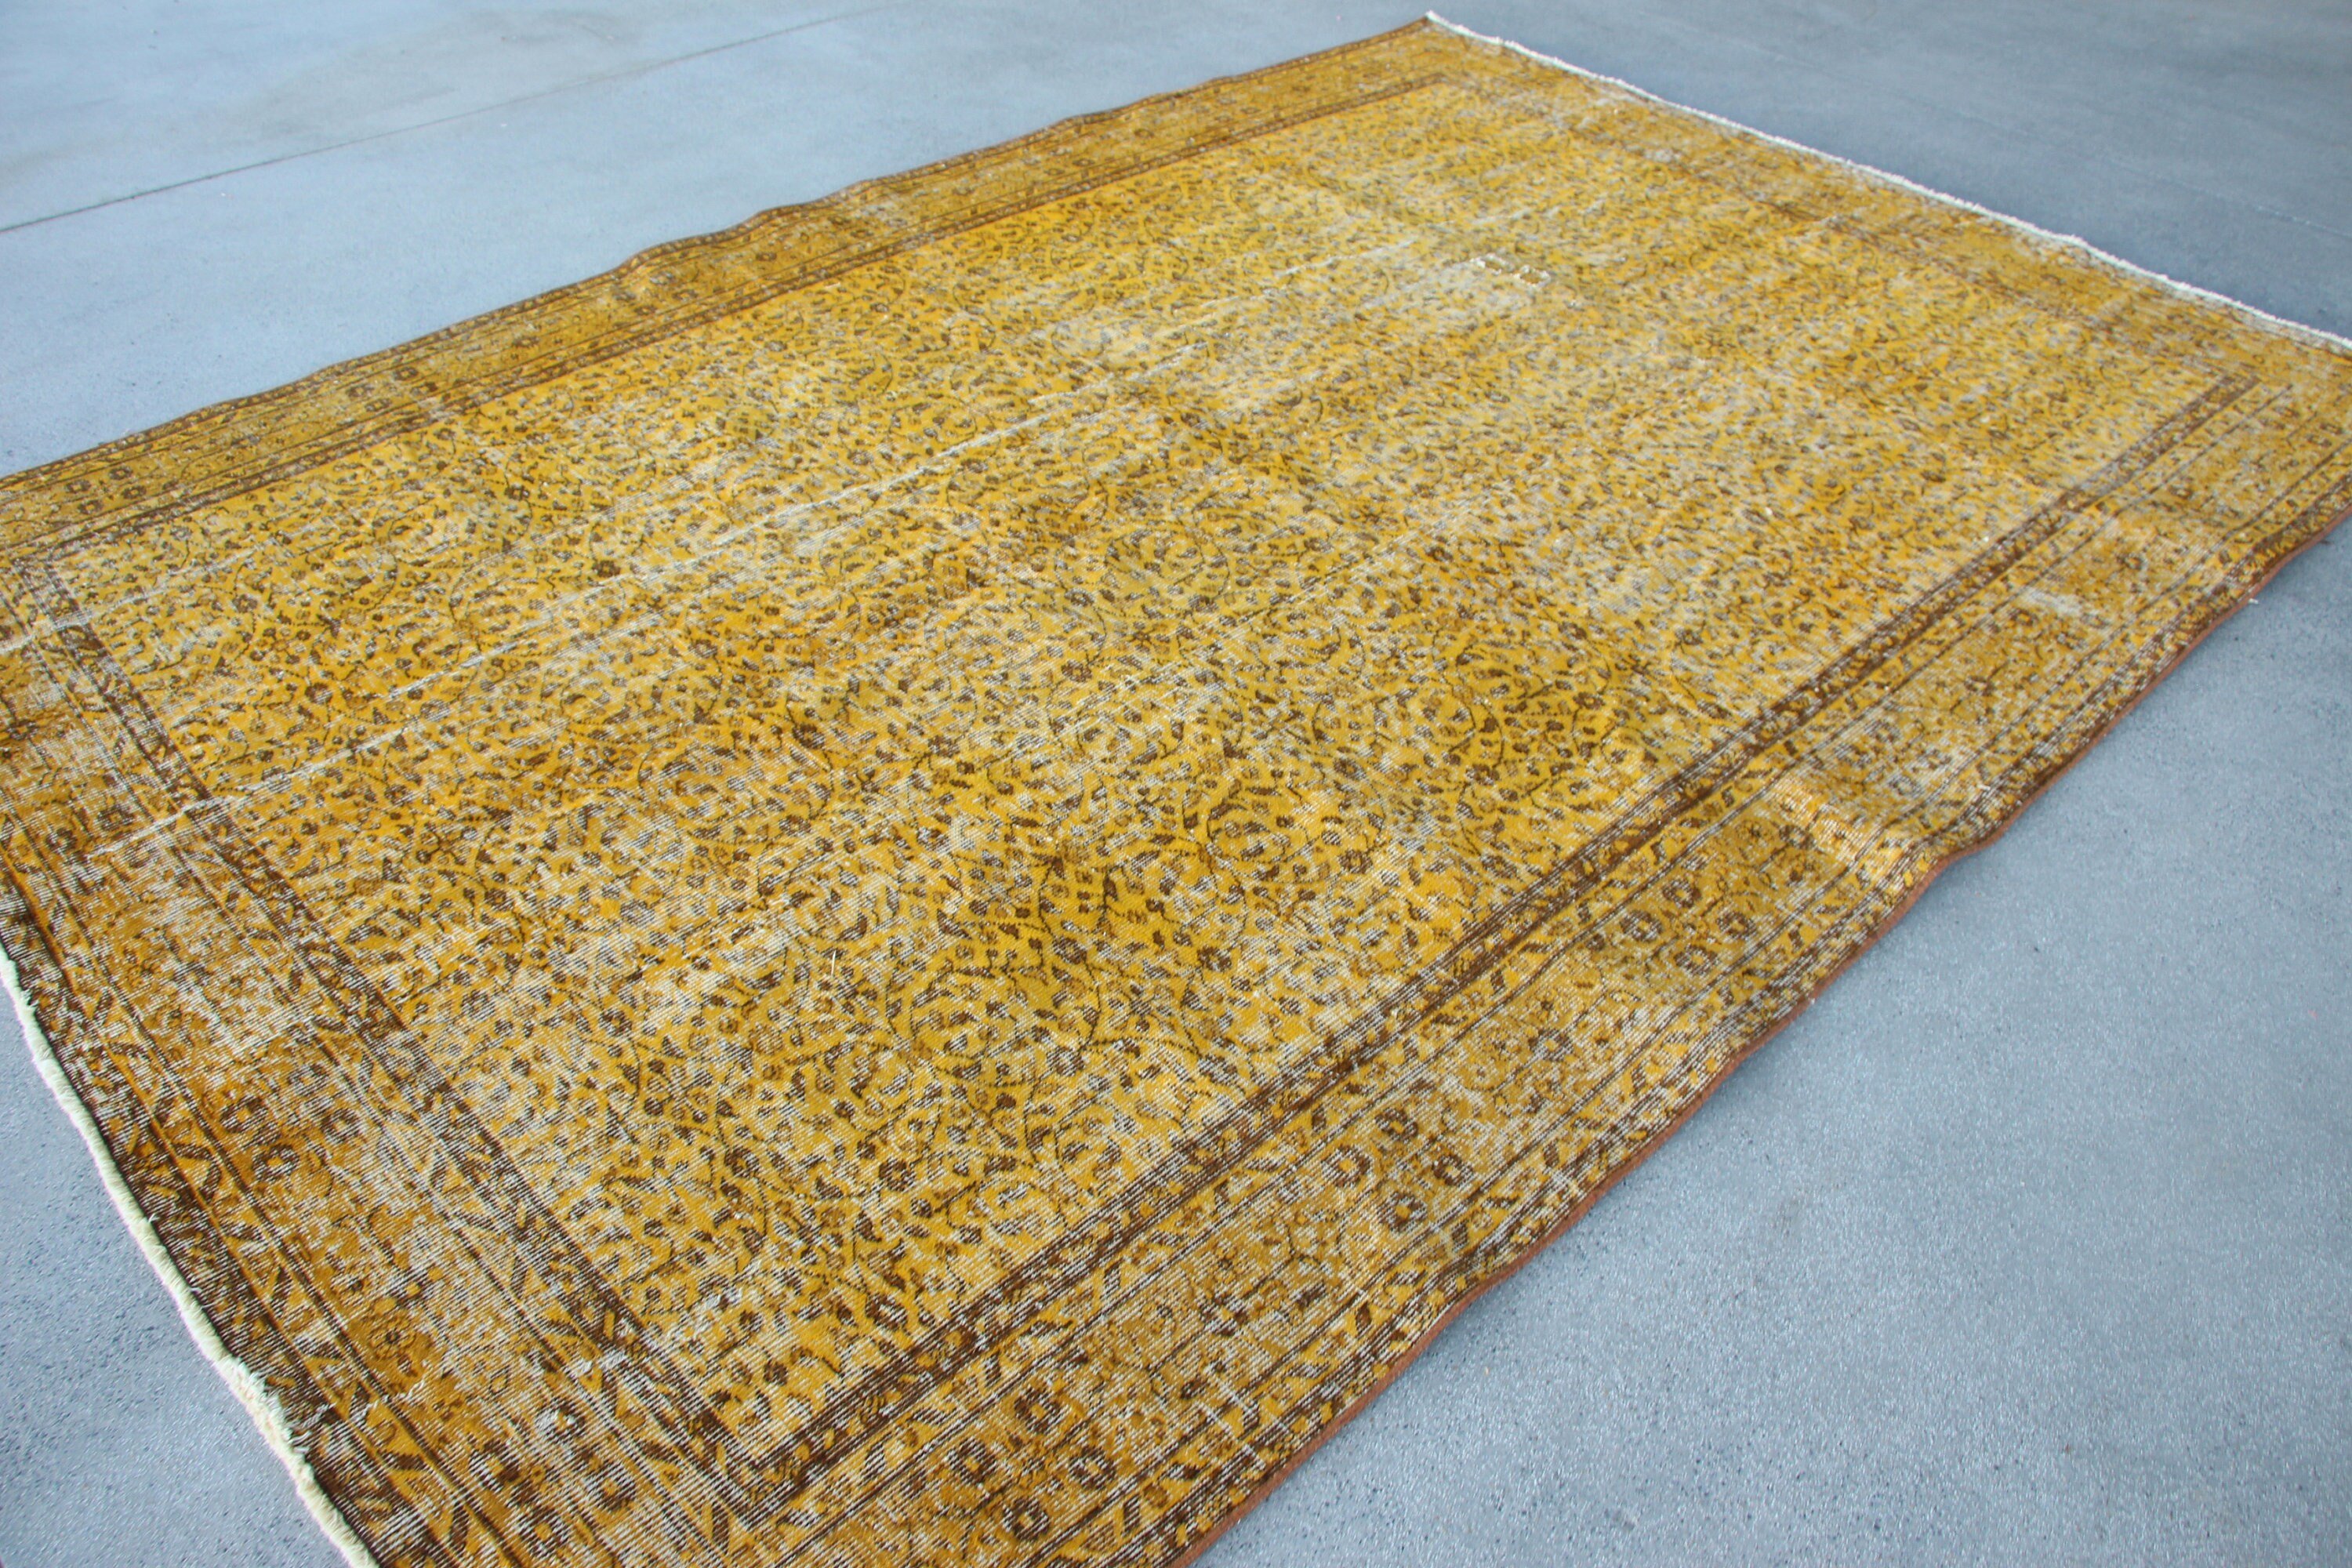 Turkish Rug, Antique Rug, Living Room Rugs, Dining Room Rug, Vintage Rug, Kitchen Rug, 7.1x10.2 ft Oversize Rugs, Yellow Cool Rugs